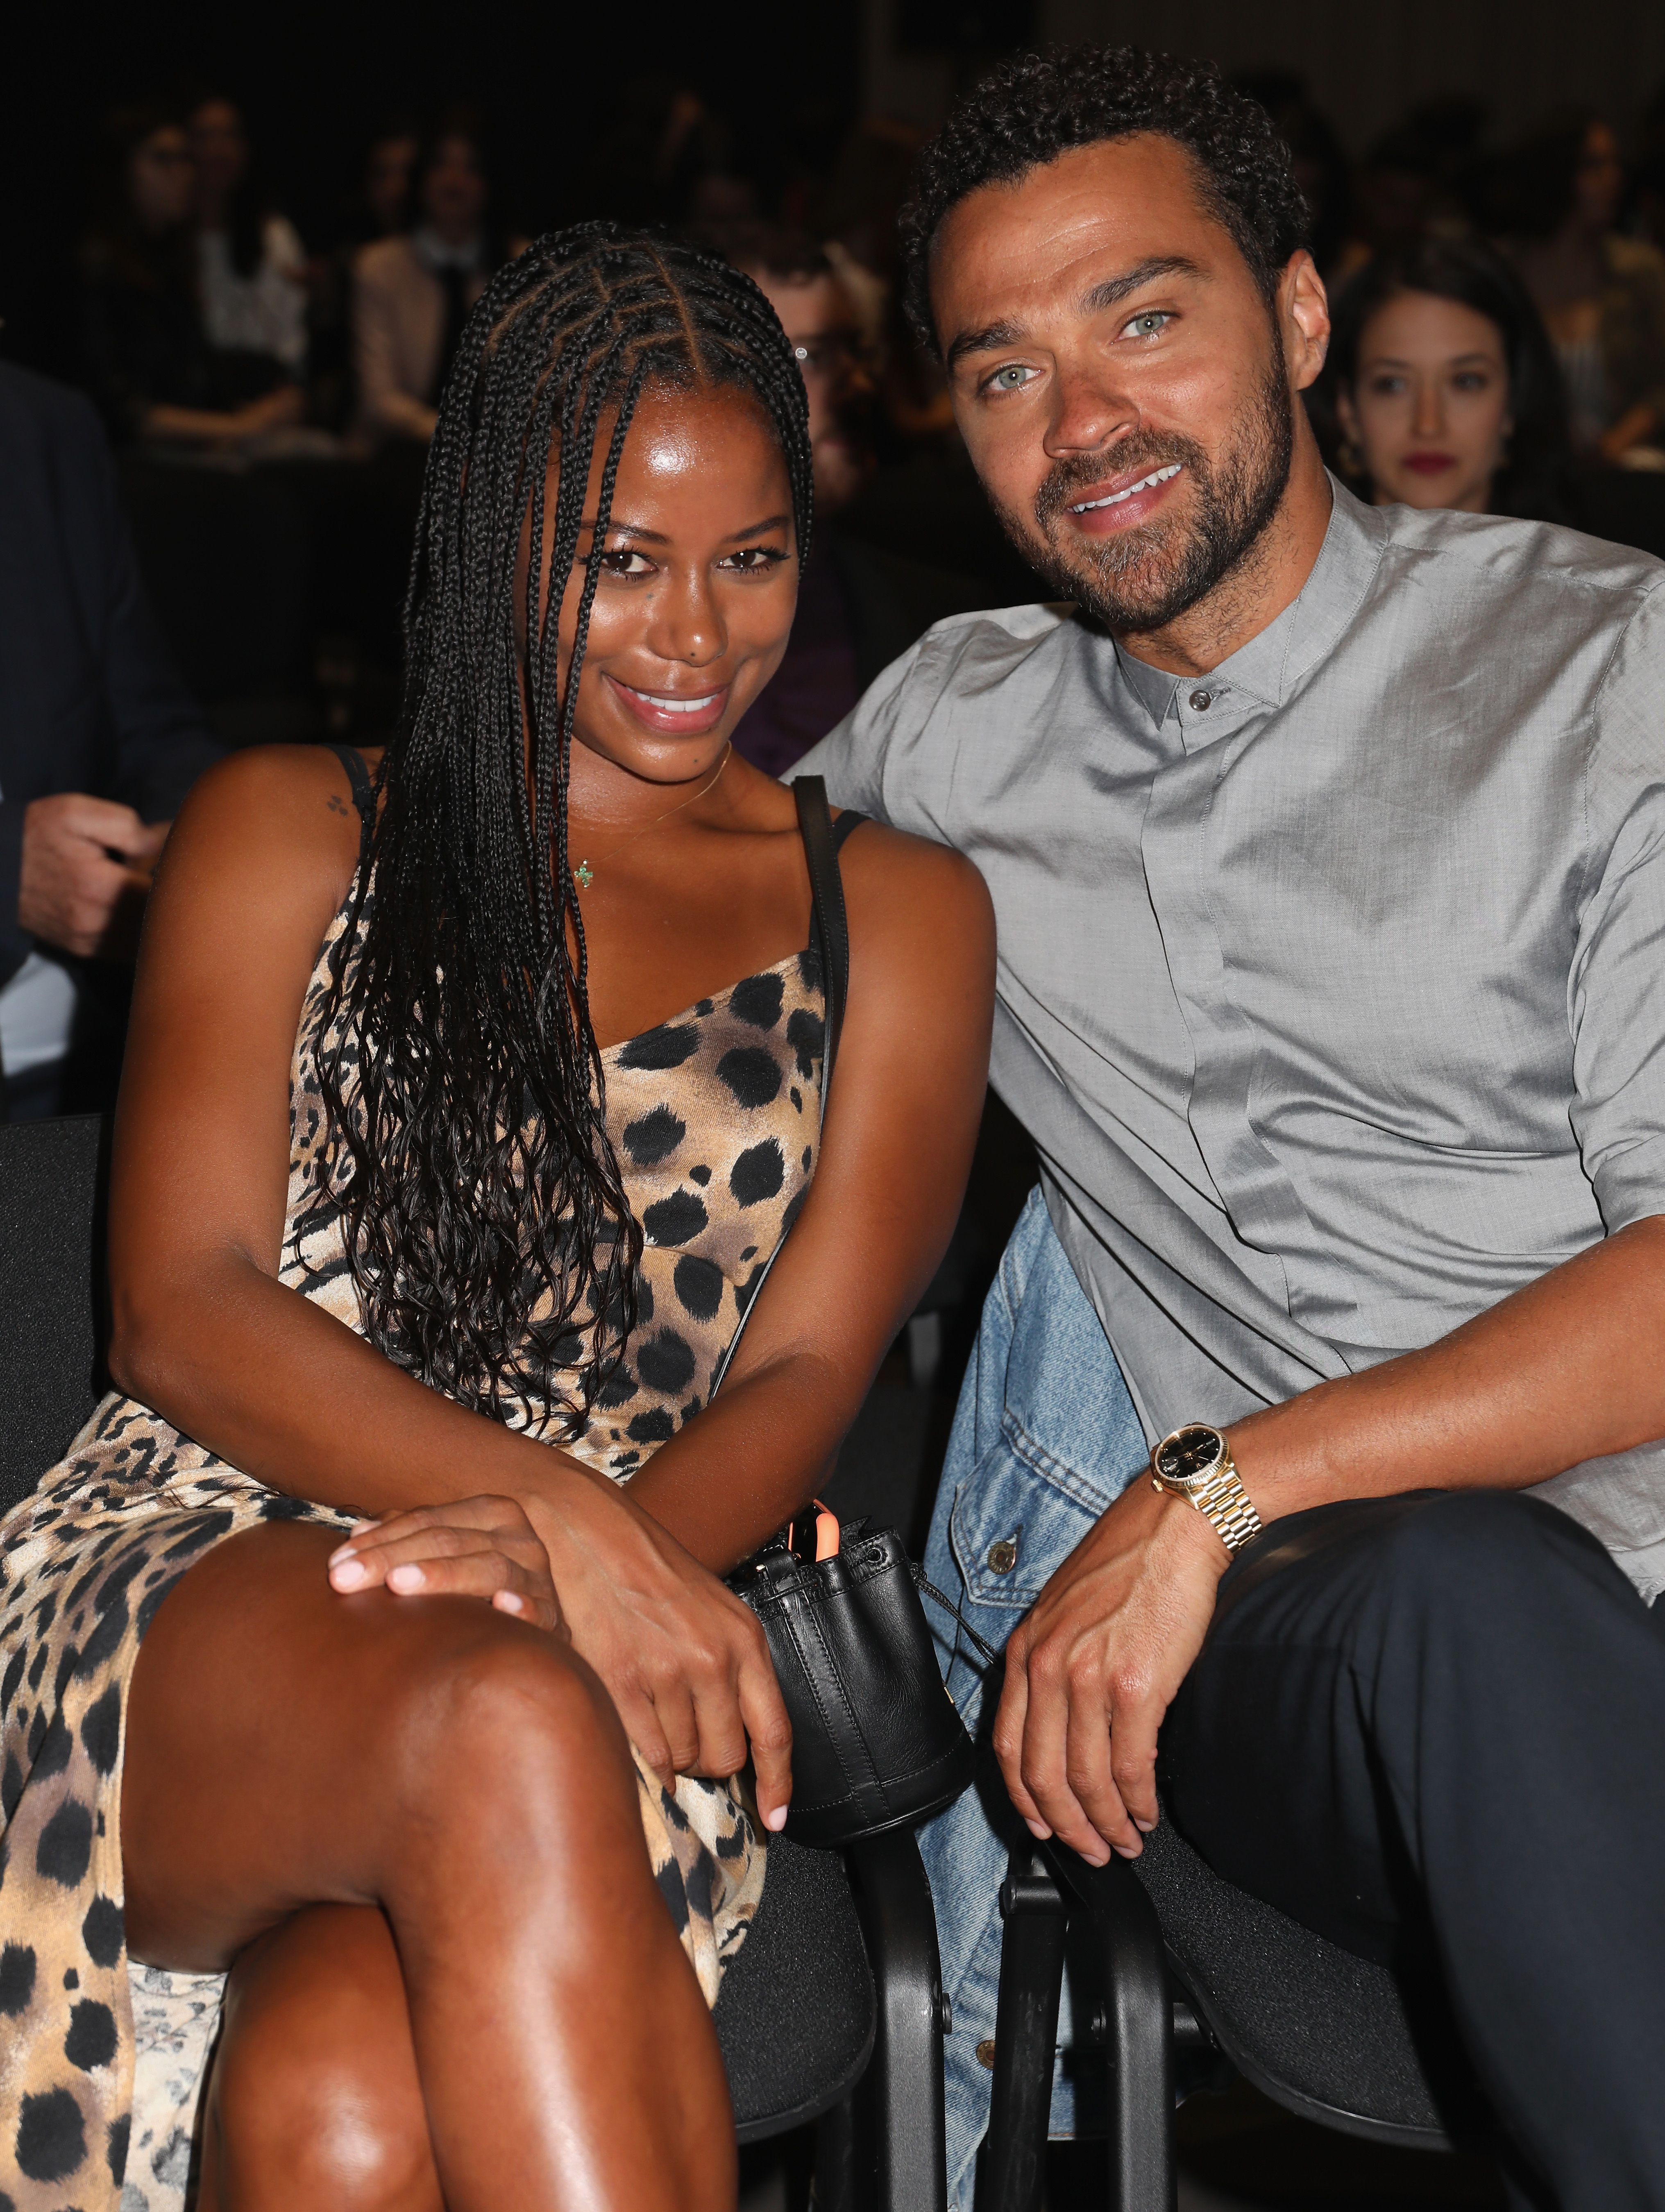 Taylour Paige and Jesse Williams attend the Filming Italy Sardegna Festival 2019 Day 2 at Forte Village Resort on June 14, 2019 in Cagliari, Italy